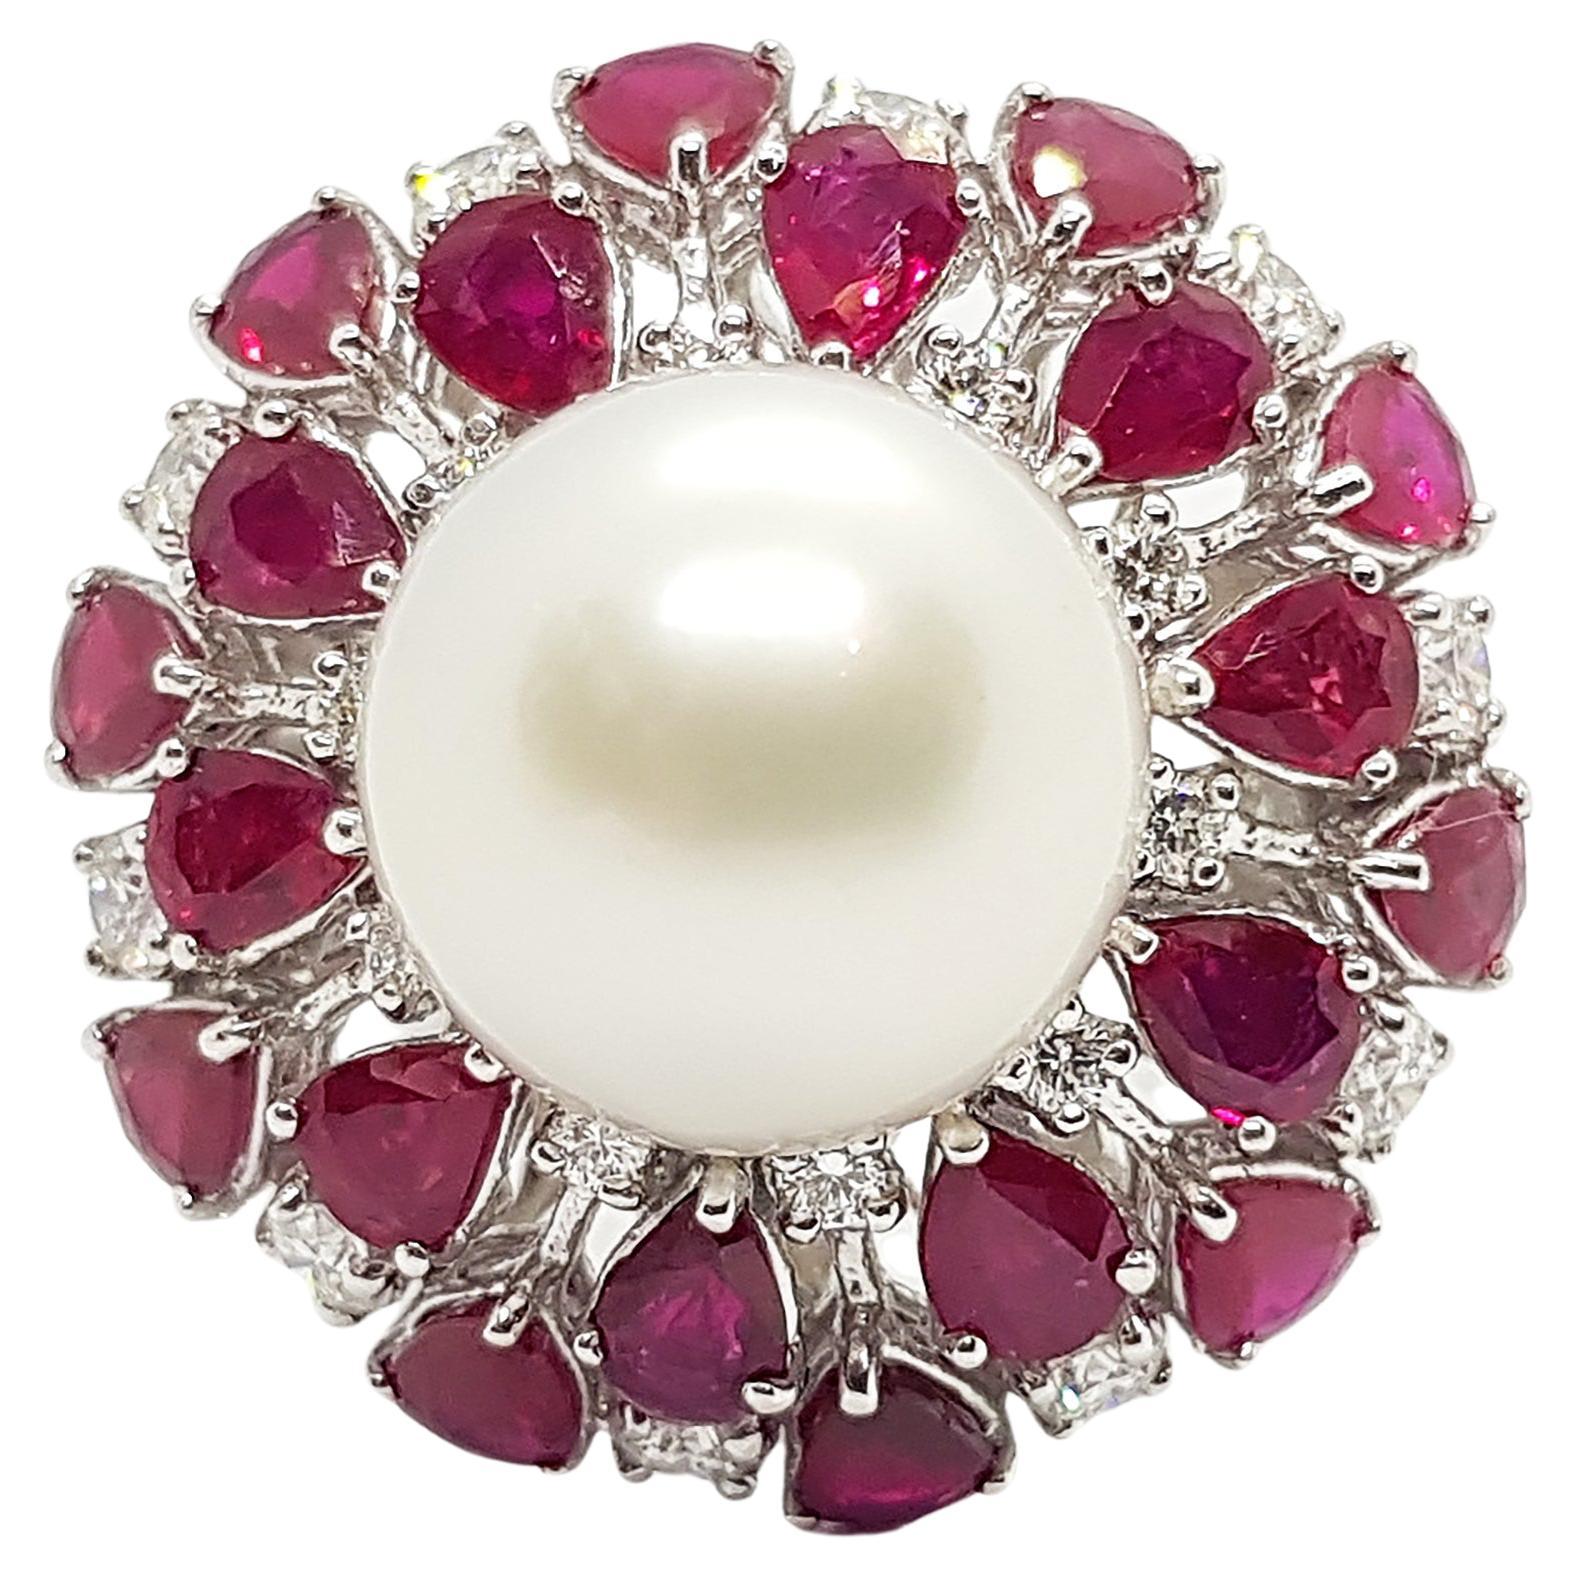 South Sea Pearl with Ruby and Diamond Ring Set in 18 Karat White Gold Settings